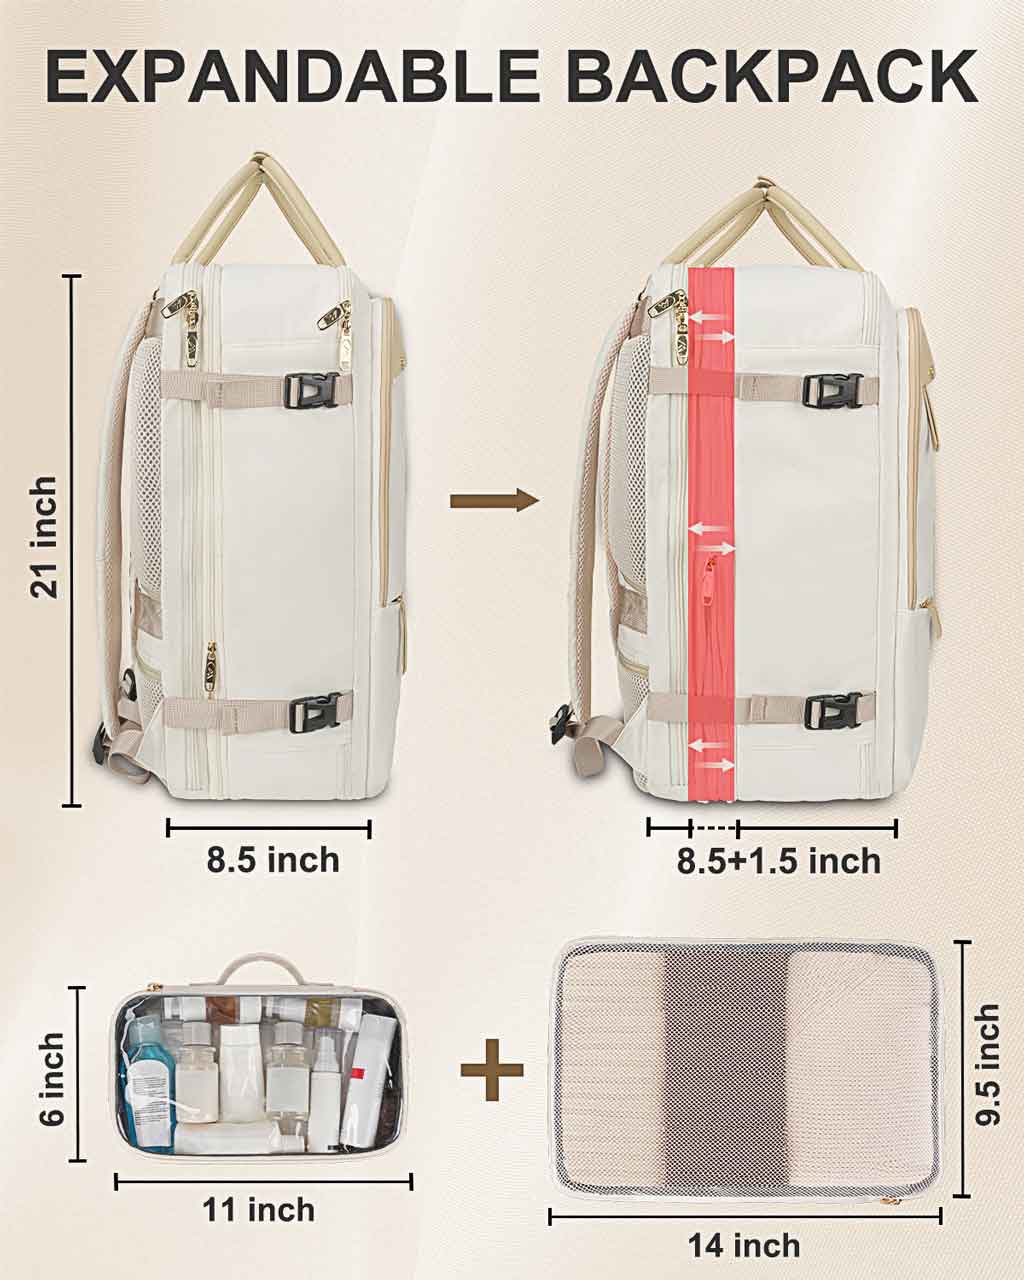 Matein Big Backpack for Travel